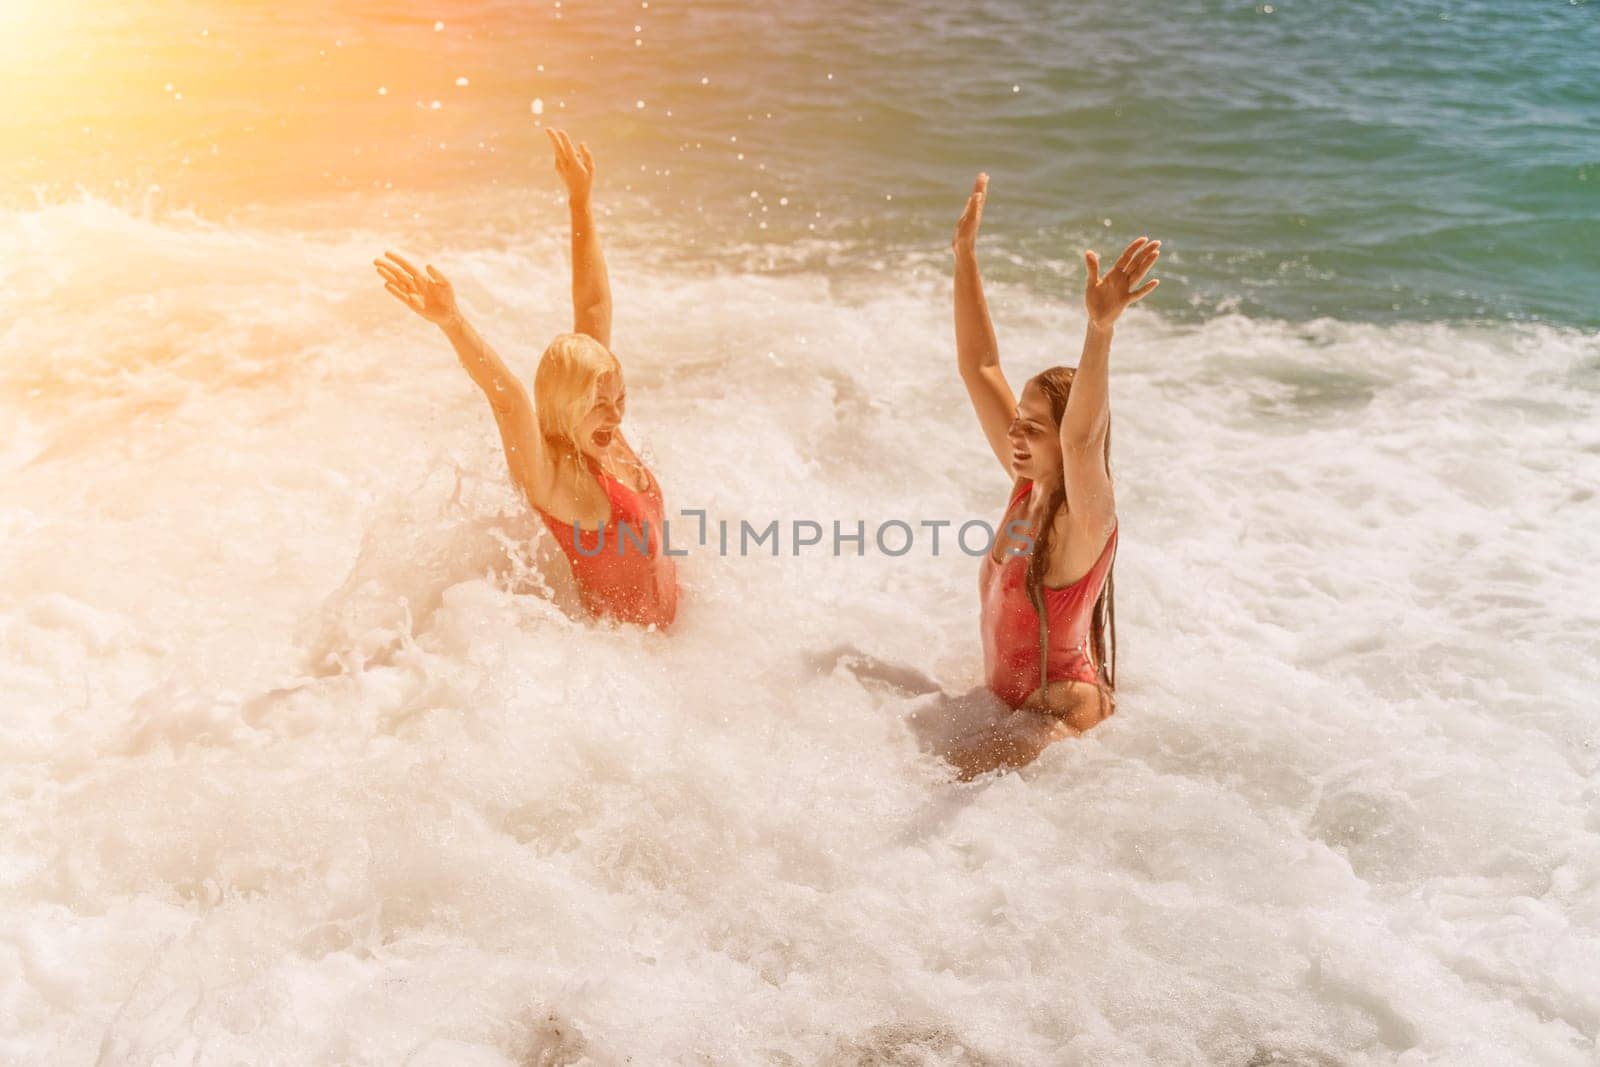 Women ocean play. Seaside, beach daytime, enjoying beach fun. Two women in red swimsuits enjoying themselves in the ocean waves and raising their hands up. by Matiunina